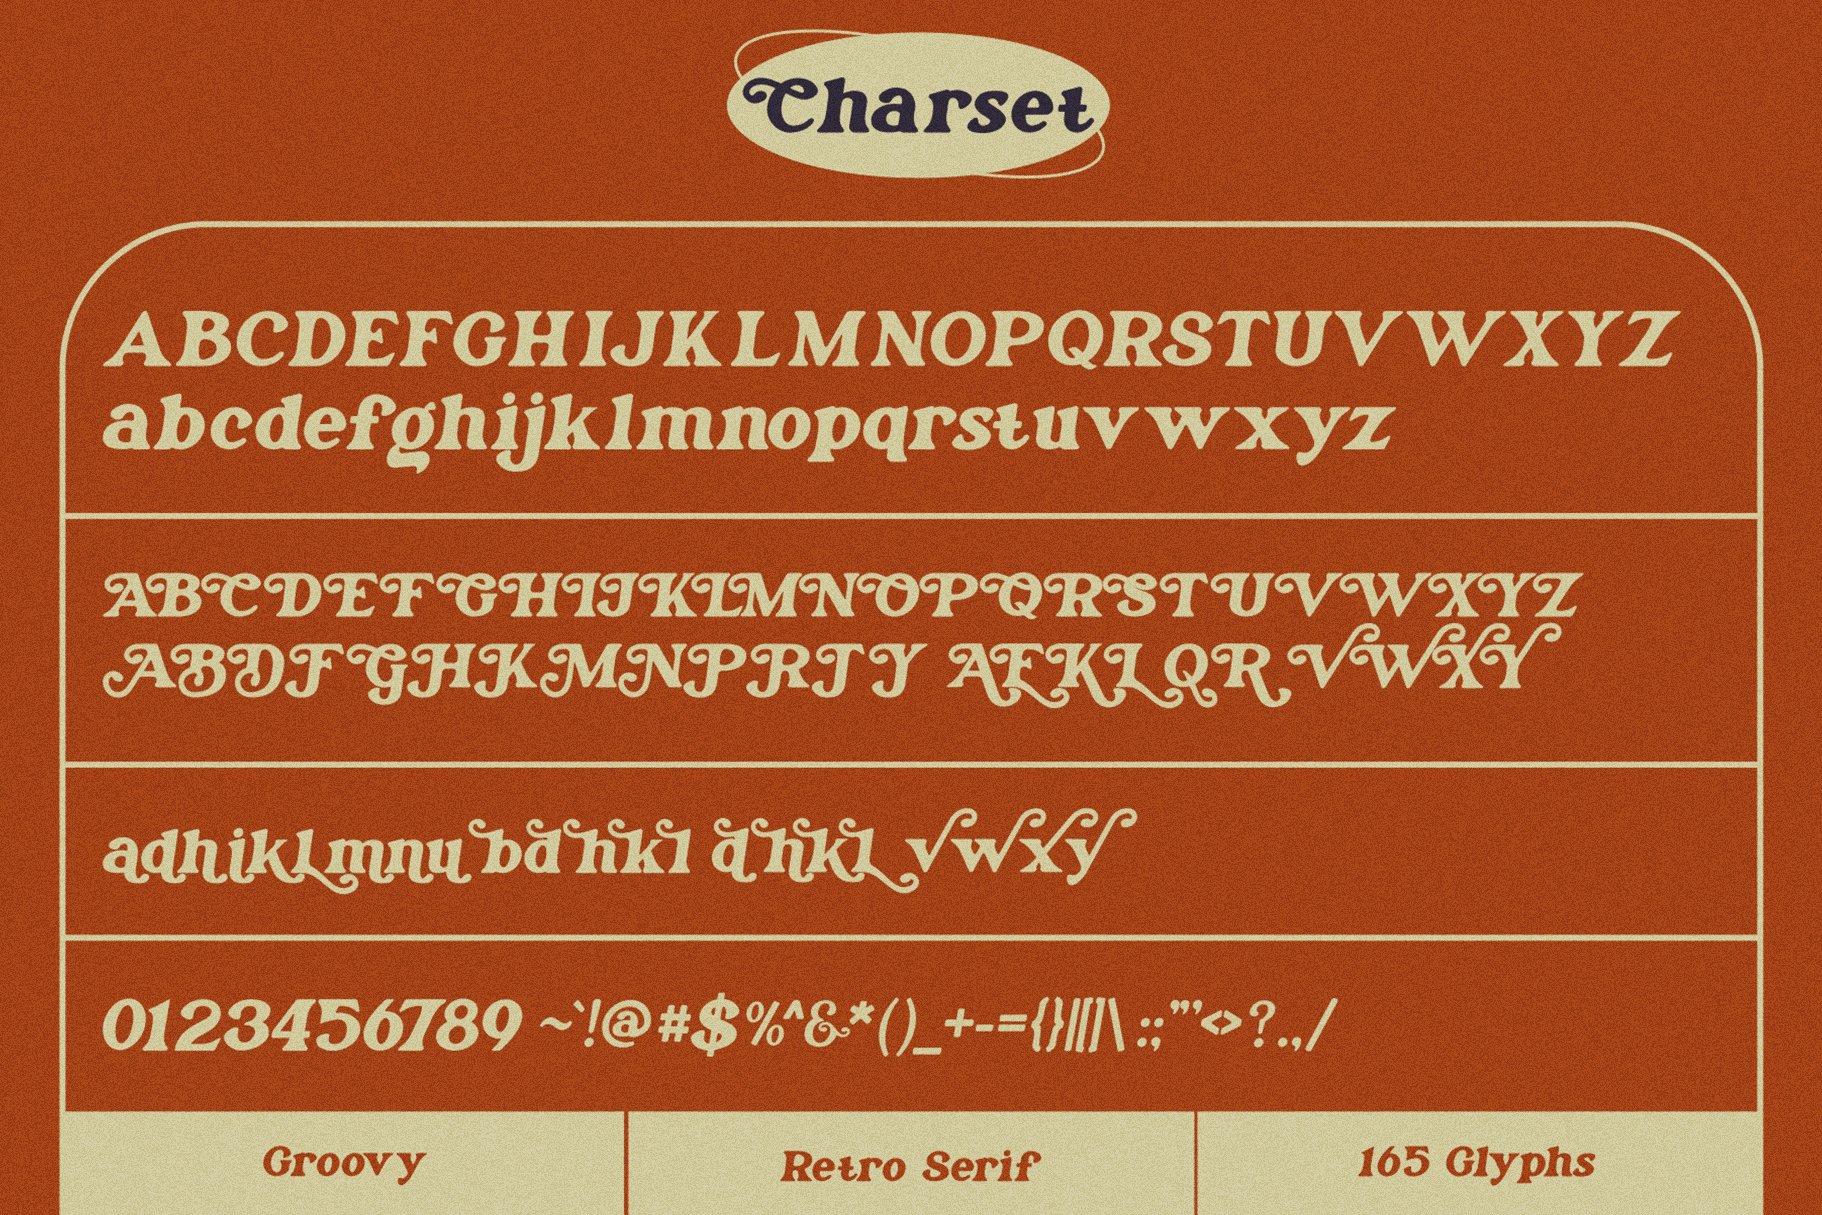 Gracy - Groovy Typeface preview image.